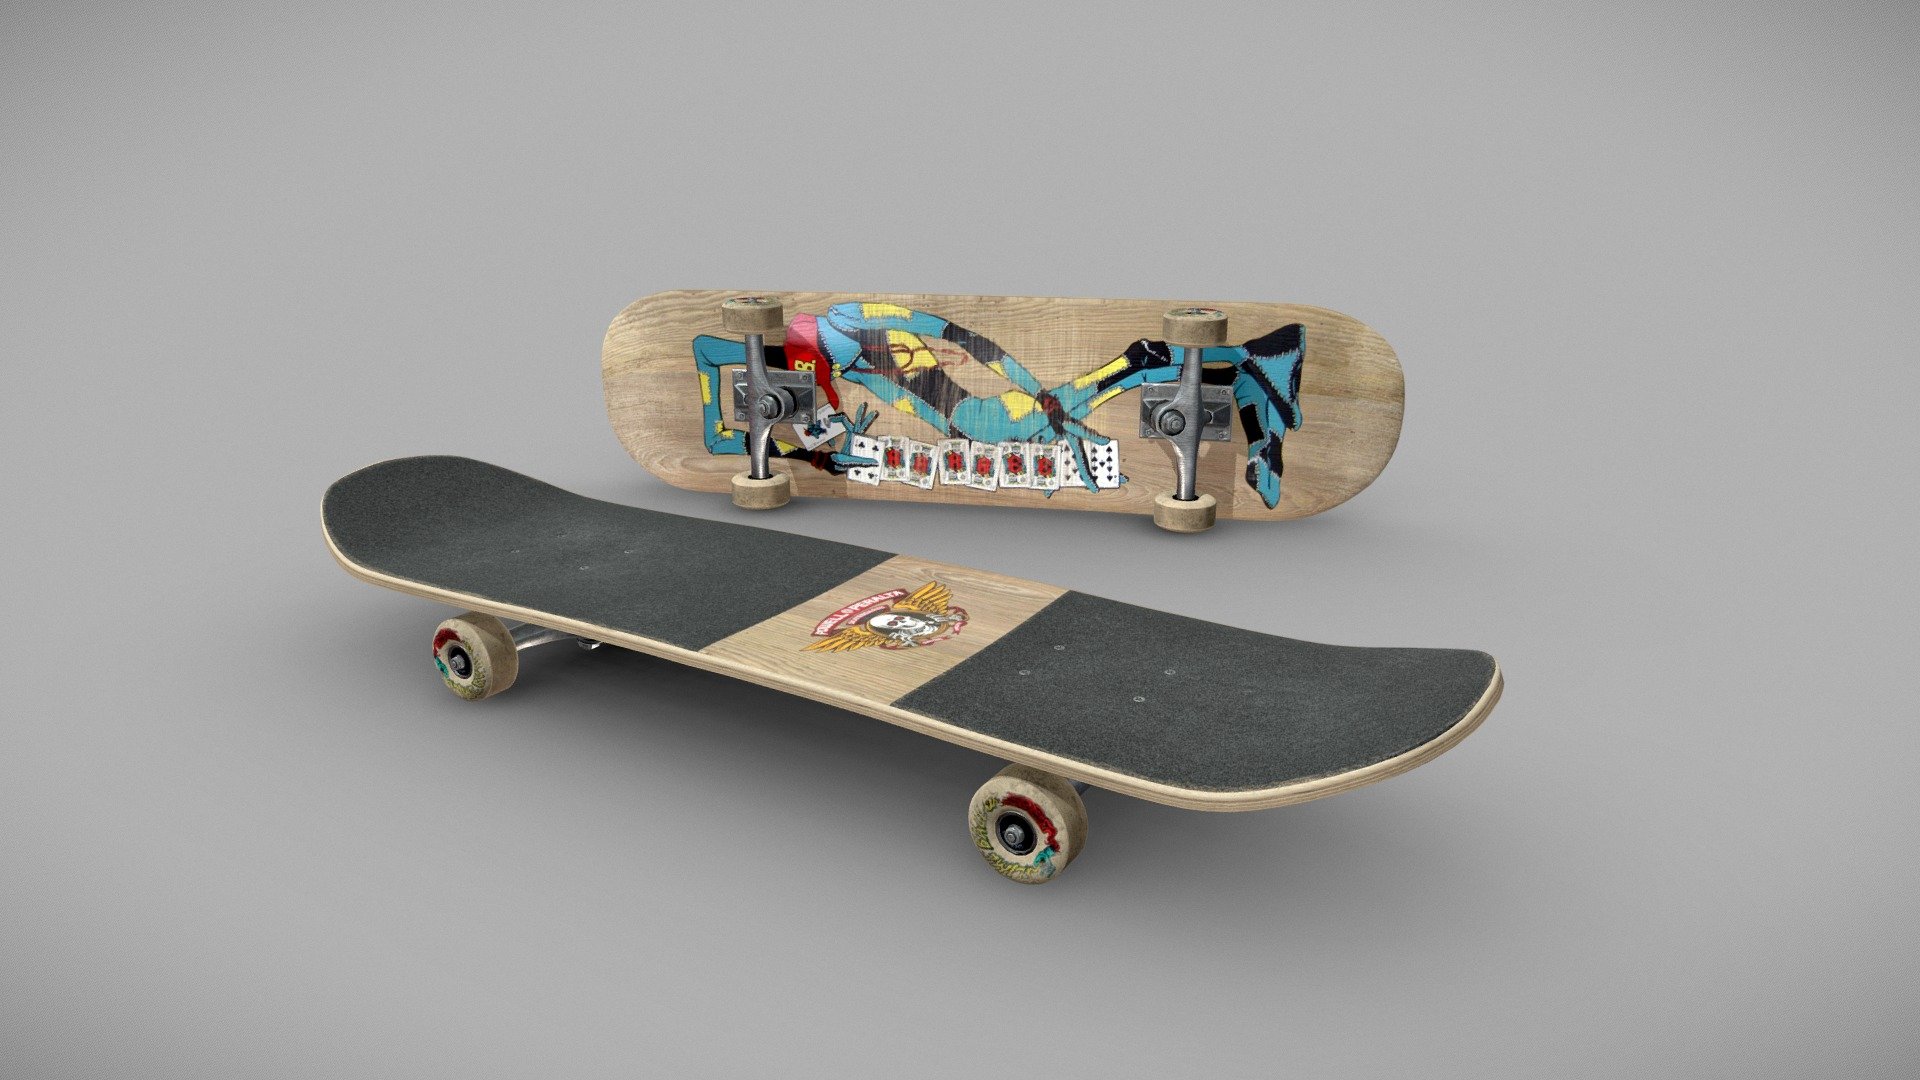 Competition Entry Based on &ldquo;Skateboard (Sketchfab Texturing Challenge)